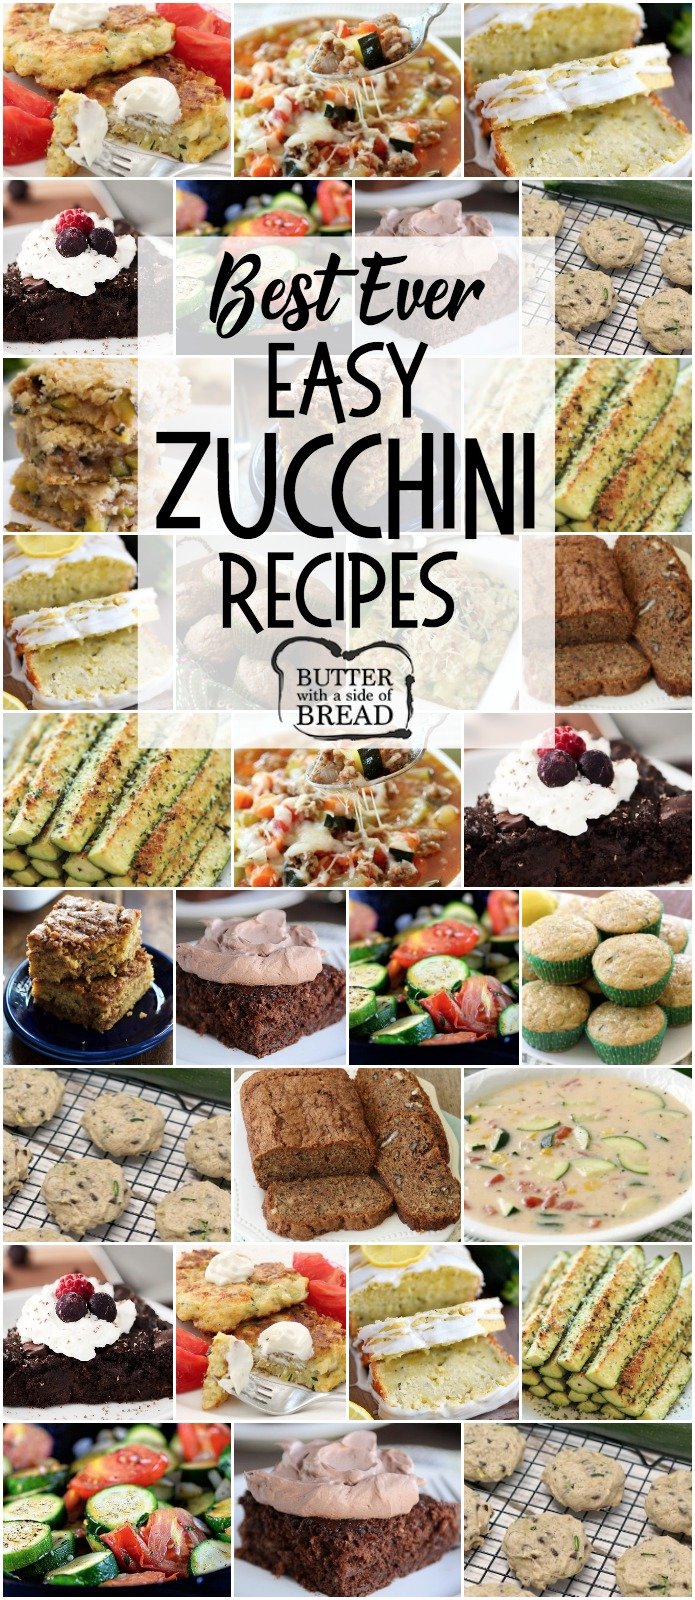 Easy Zucchini Recipes that everyone goes crazy over! Best Zucchini Bread, Zucchini Cookies, grilled zucchini and more. These are the best zucchini recipes for when your garden is overflowing! #Zucchini #recipes for #summer #garden #healthy #food from Butter With A Side of Bread